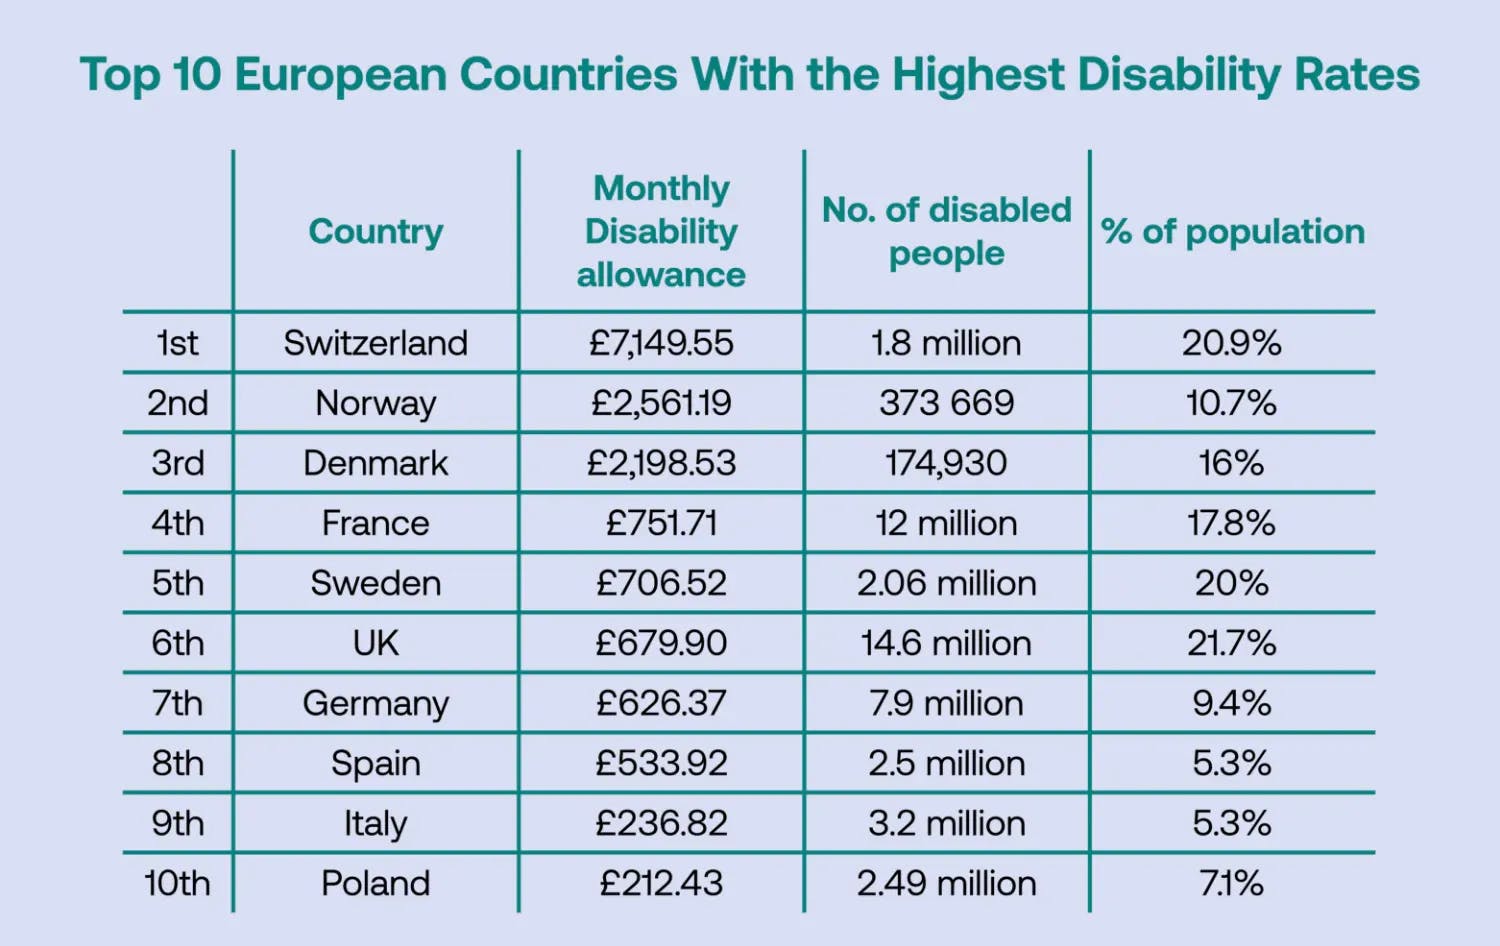 Table of top 10 european countries with the highest disability rates